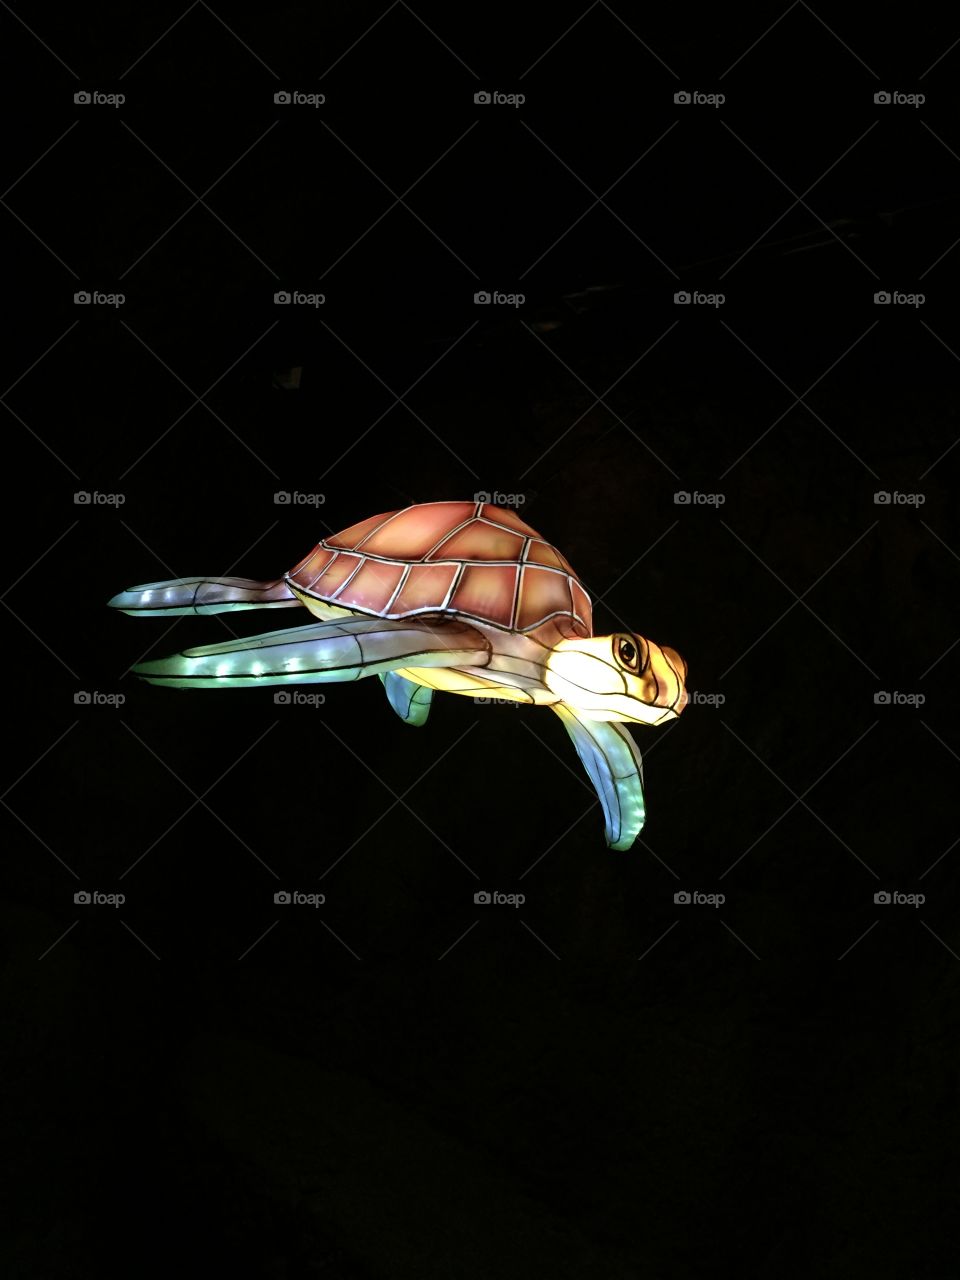 An illuminated turtle. Photo is taken at a special evening at the zoo.